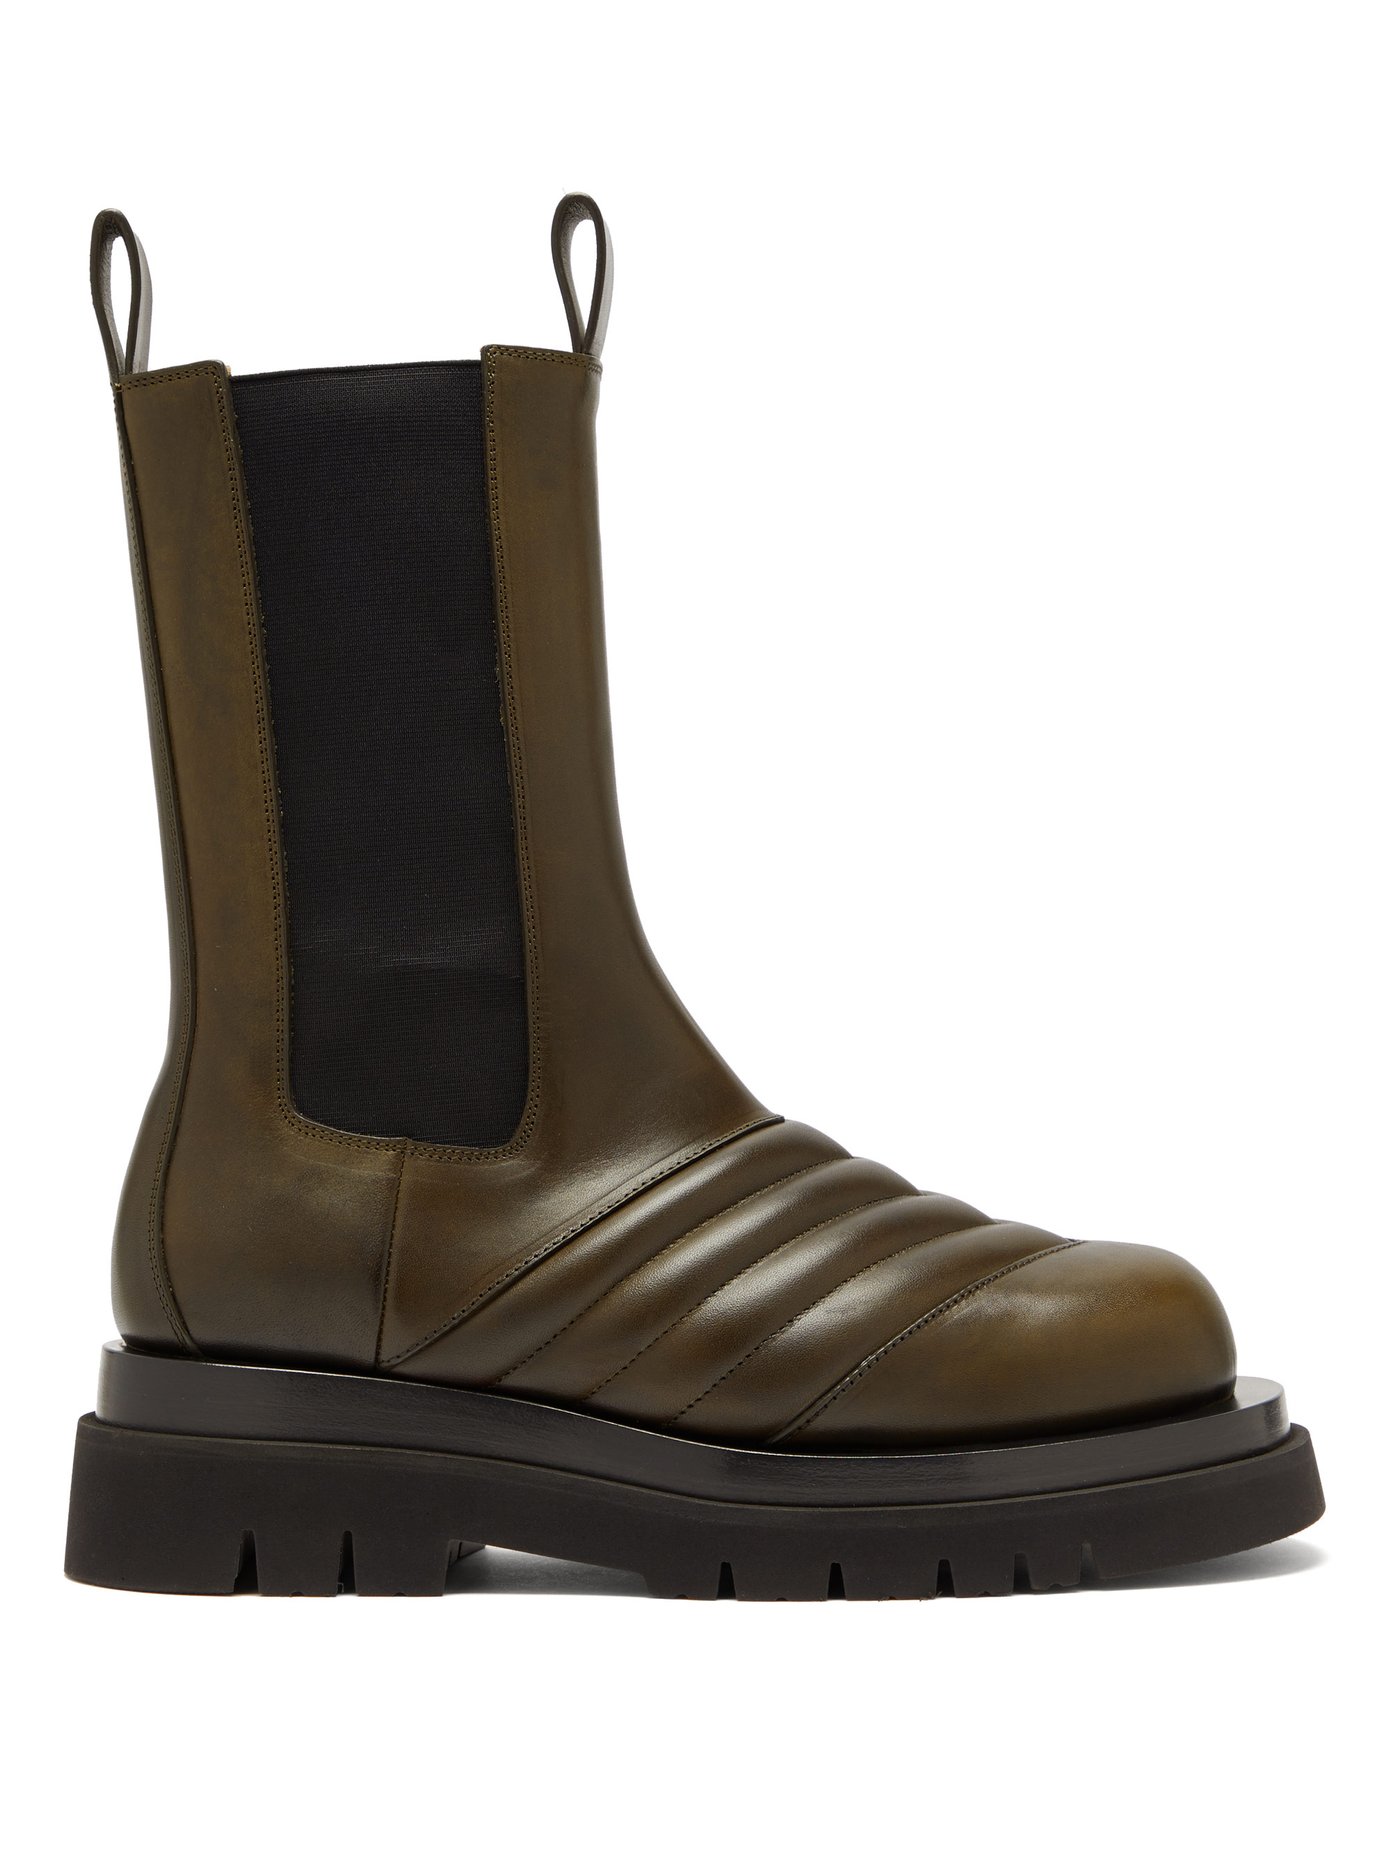 next leather chelsea boots